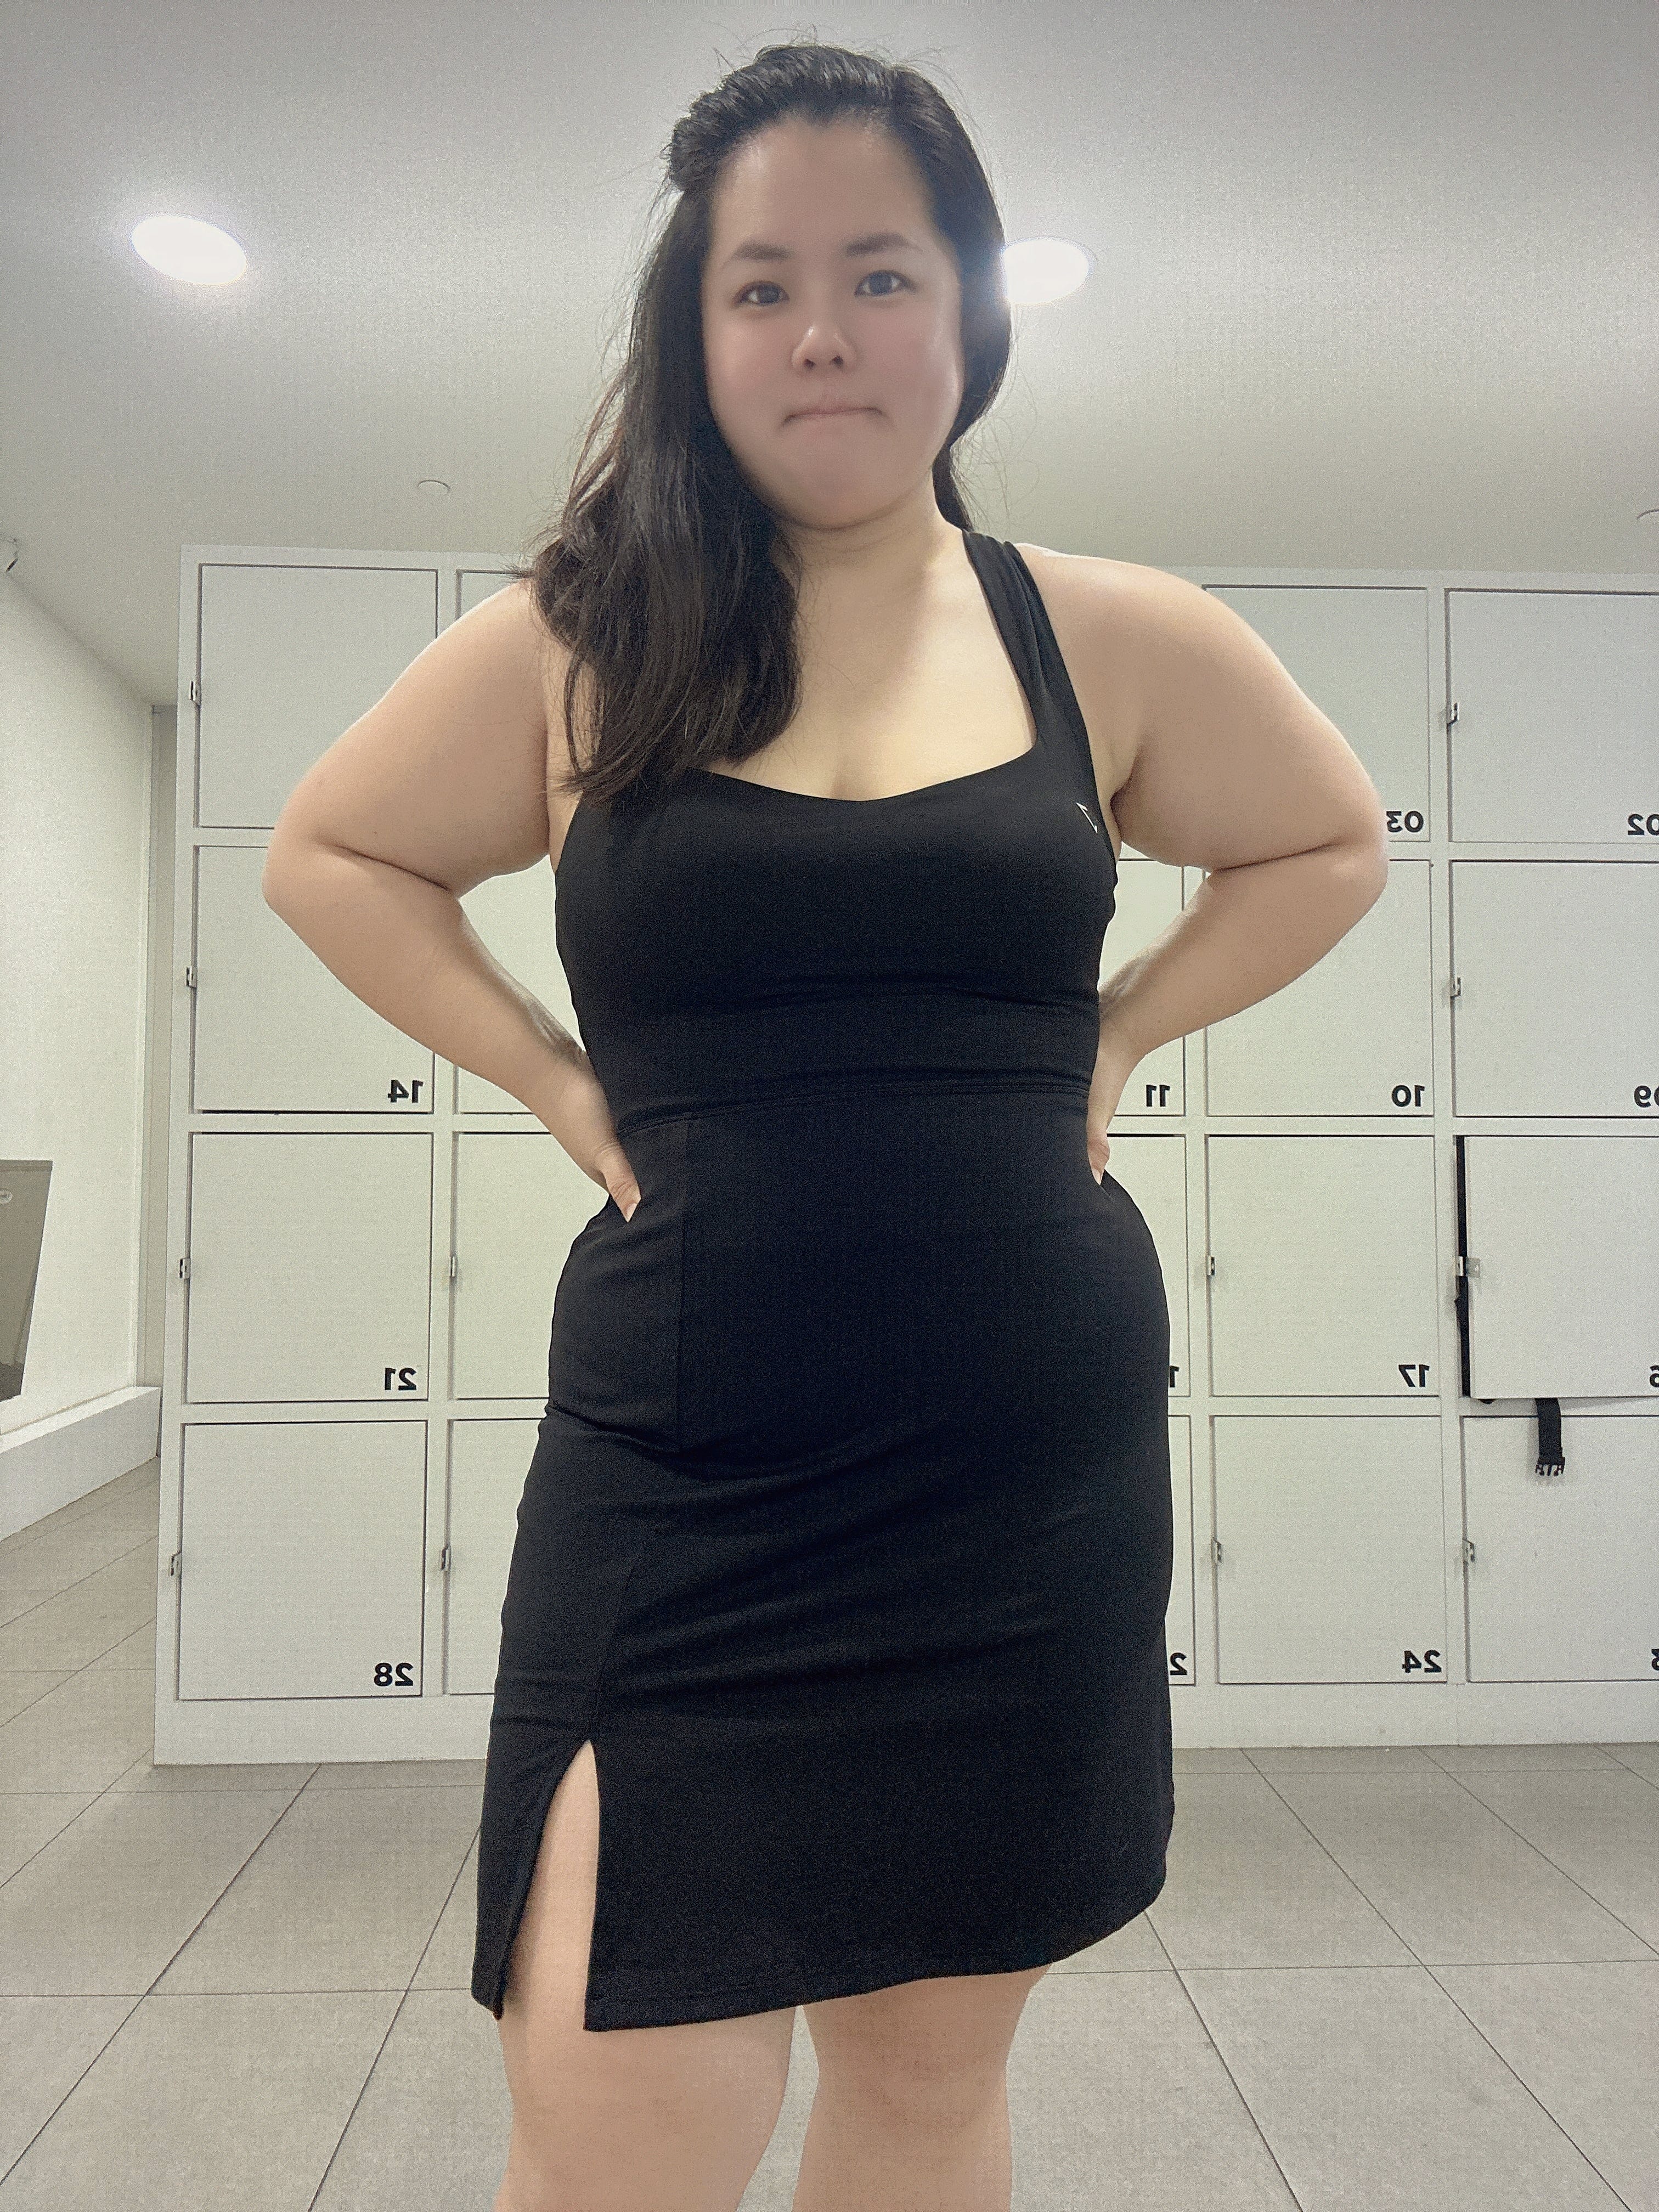 Everyday active dress (there is no skorts inside)